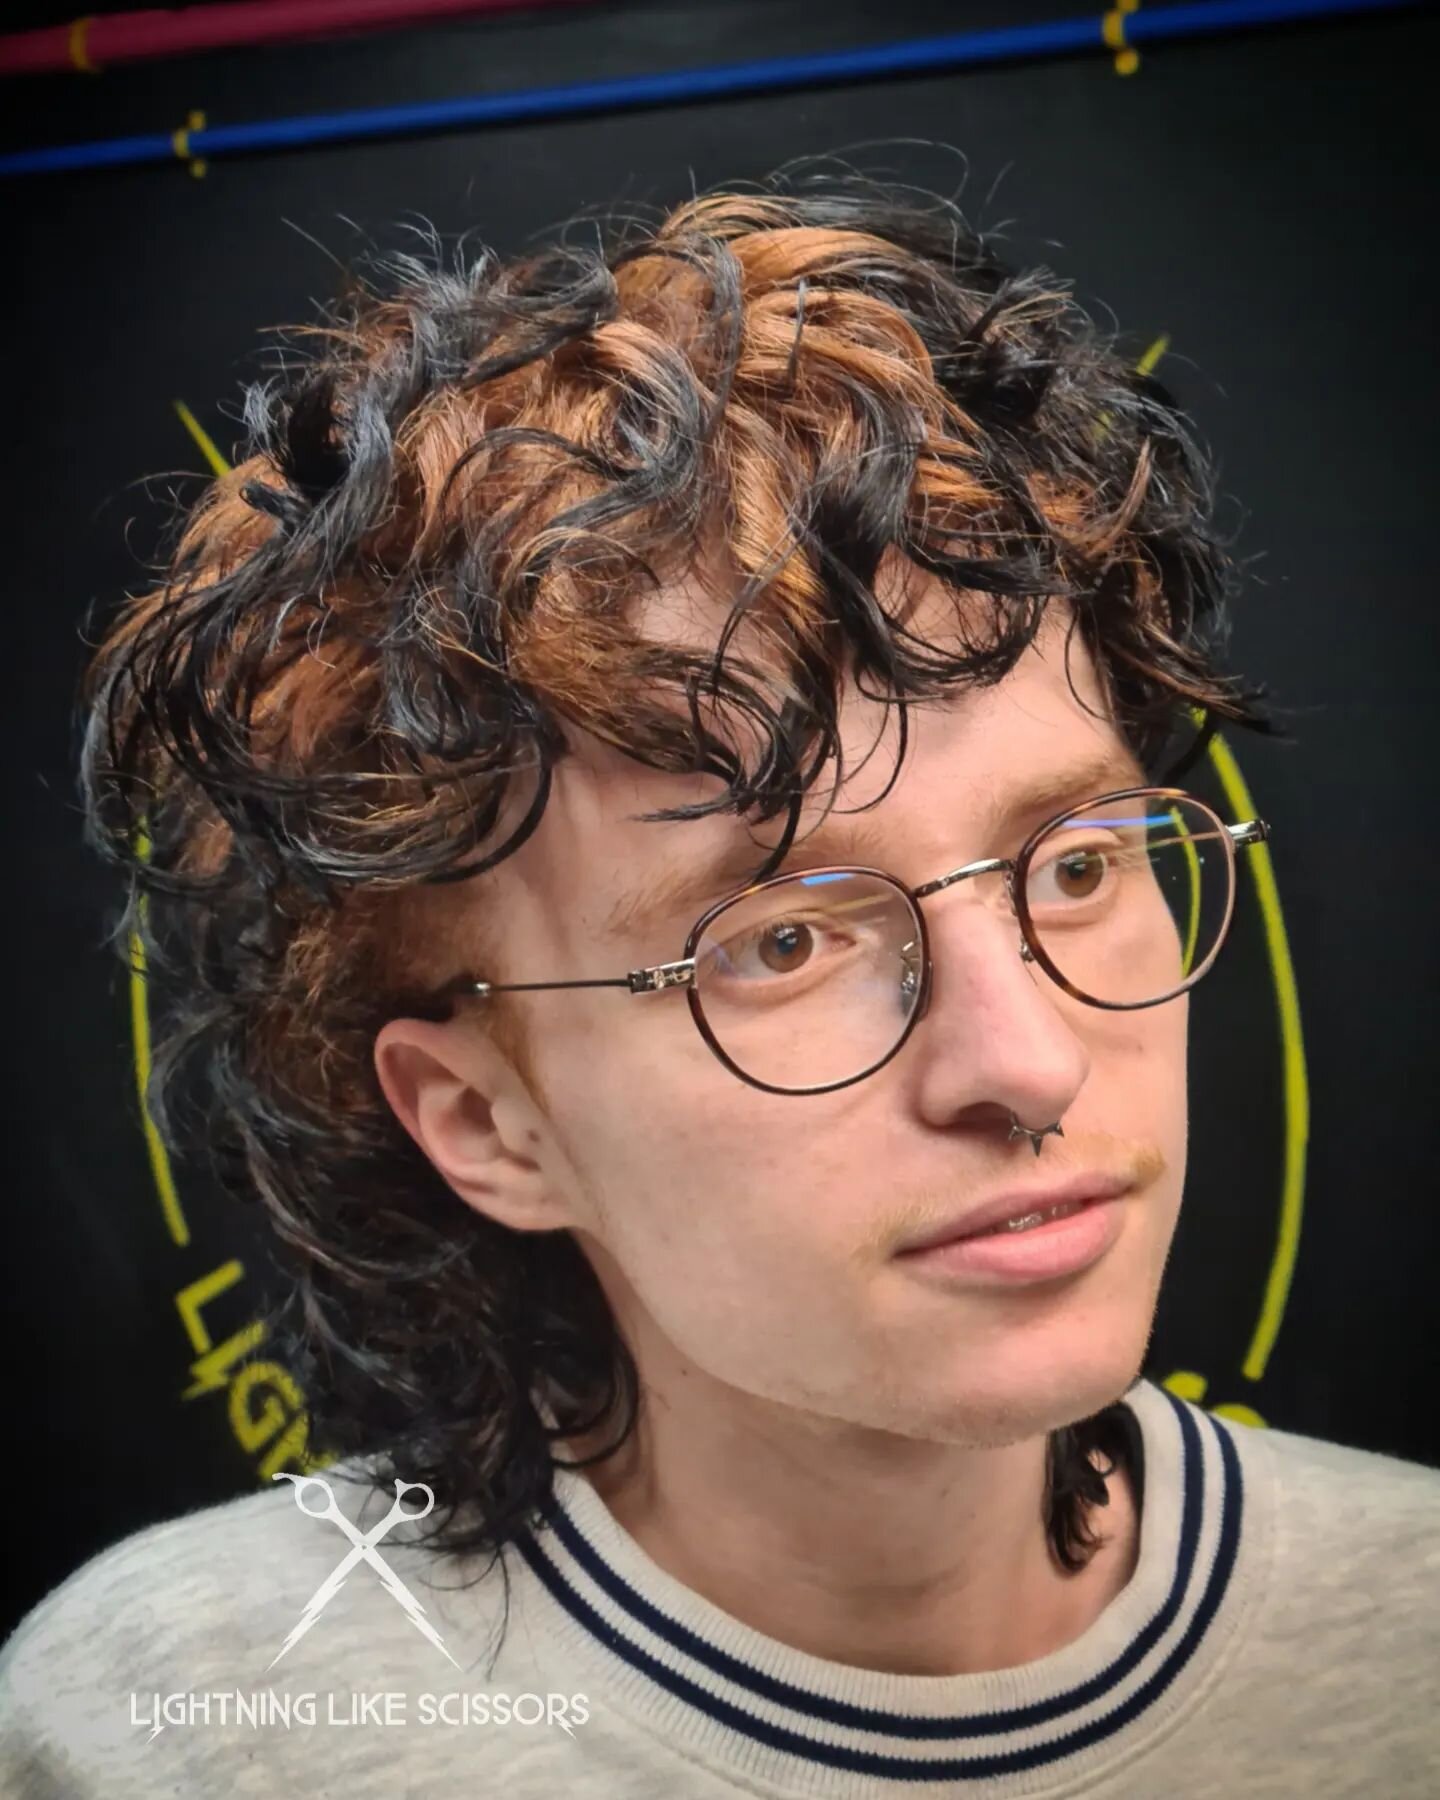 ⚡Robin (he/they) aka Cavetown paid us a visit ahead of his US tour to get their hair spotlight-ready! Lead artist and studio owner, Buck, gave Robin a cool grungey look with designer regrowth⚡️✂️

⚡Follow @lightninglikescissors, click BOOK NOW and do